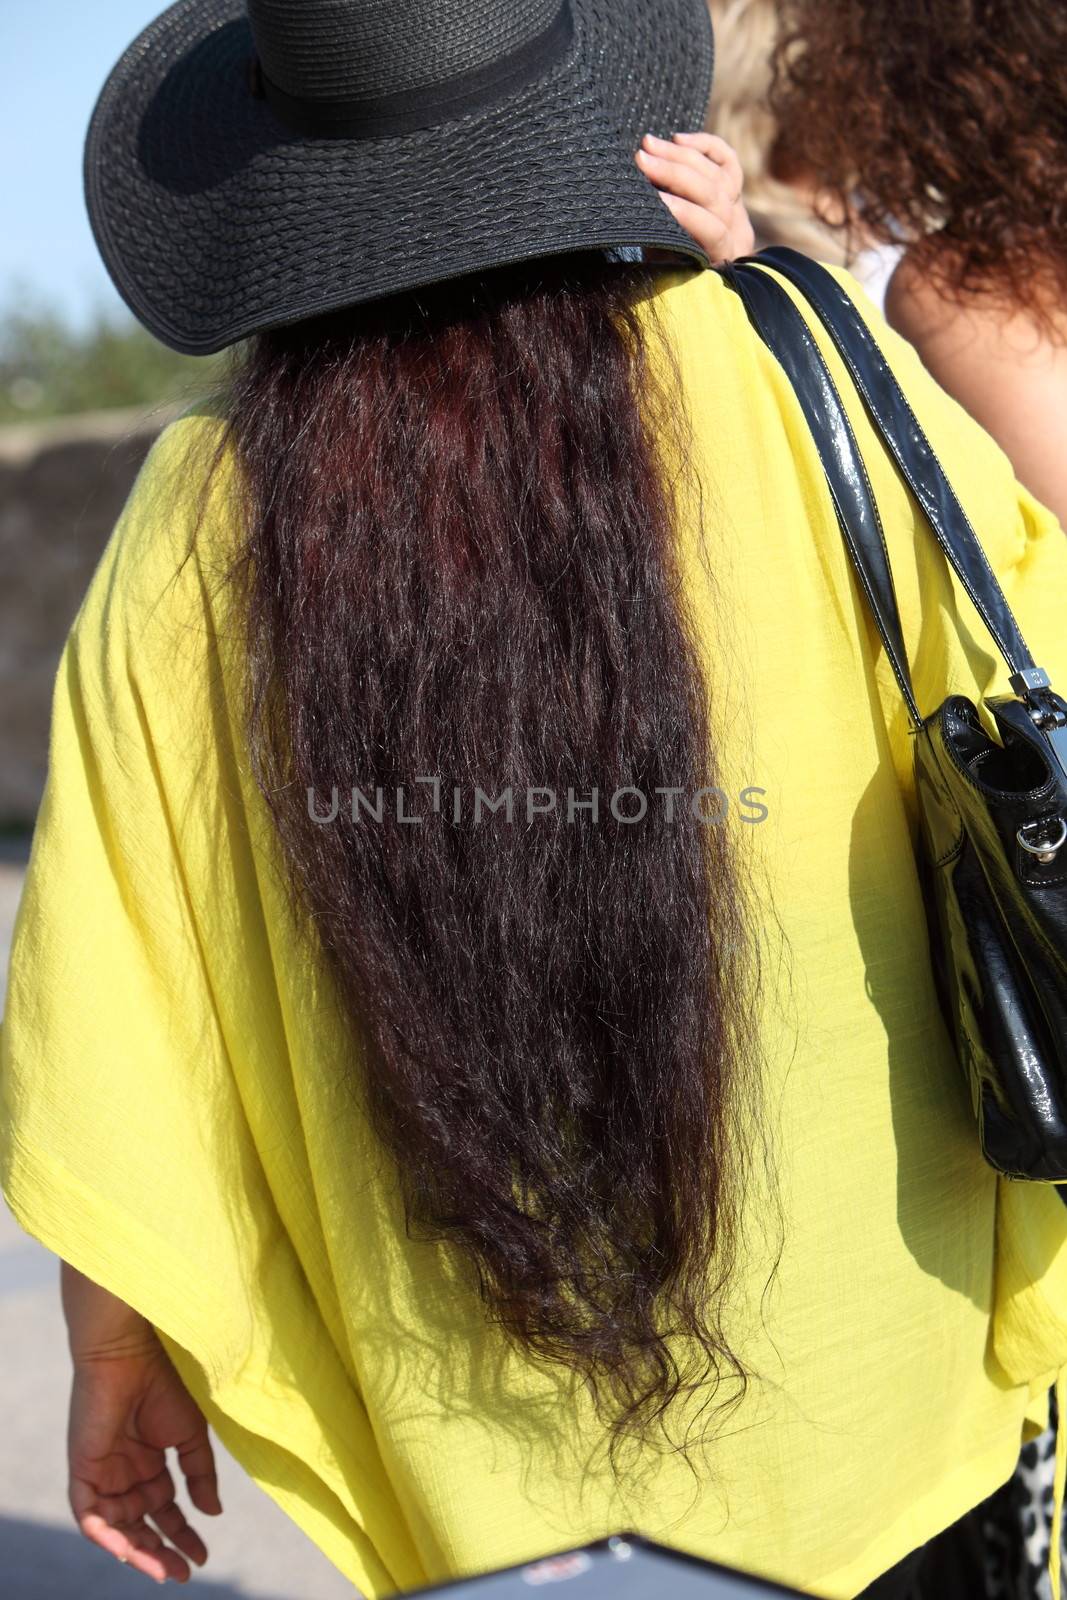 Rear view of a woman with long brunette hair by Farina6000